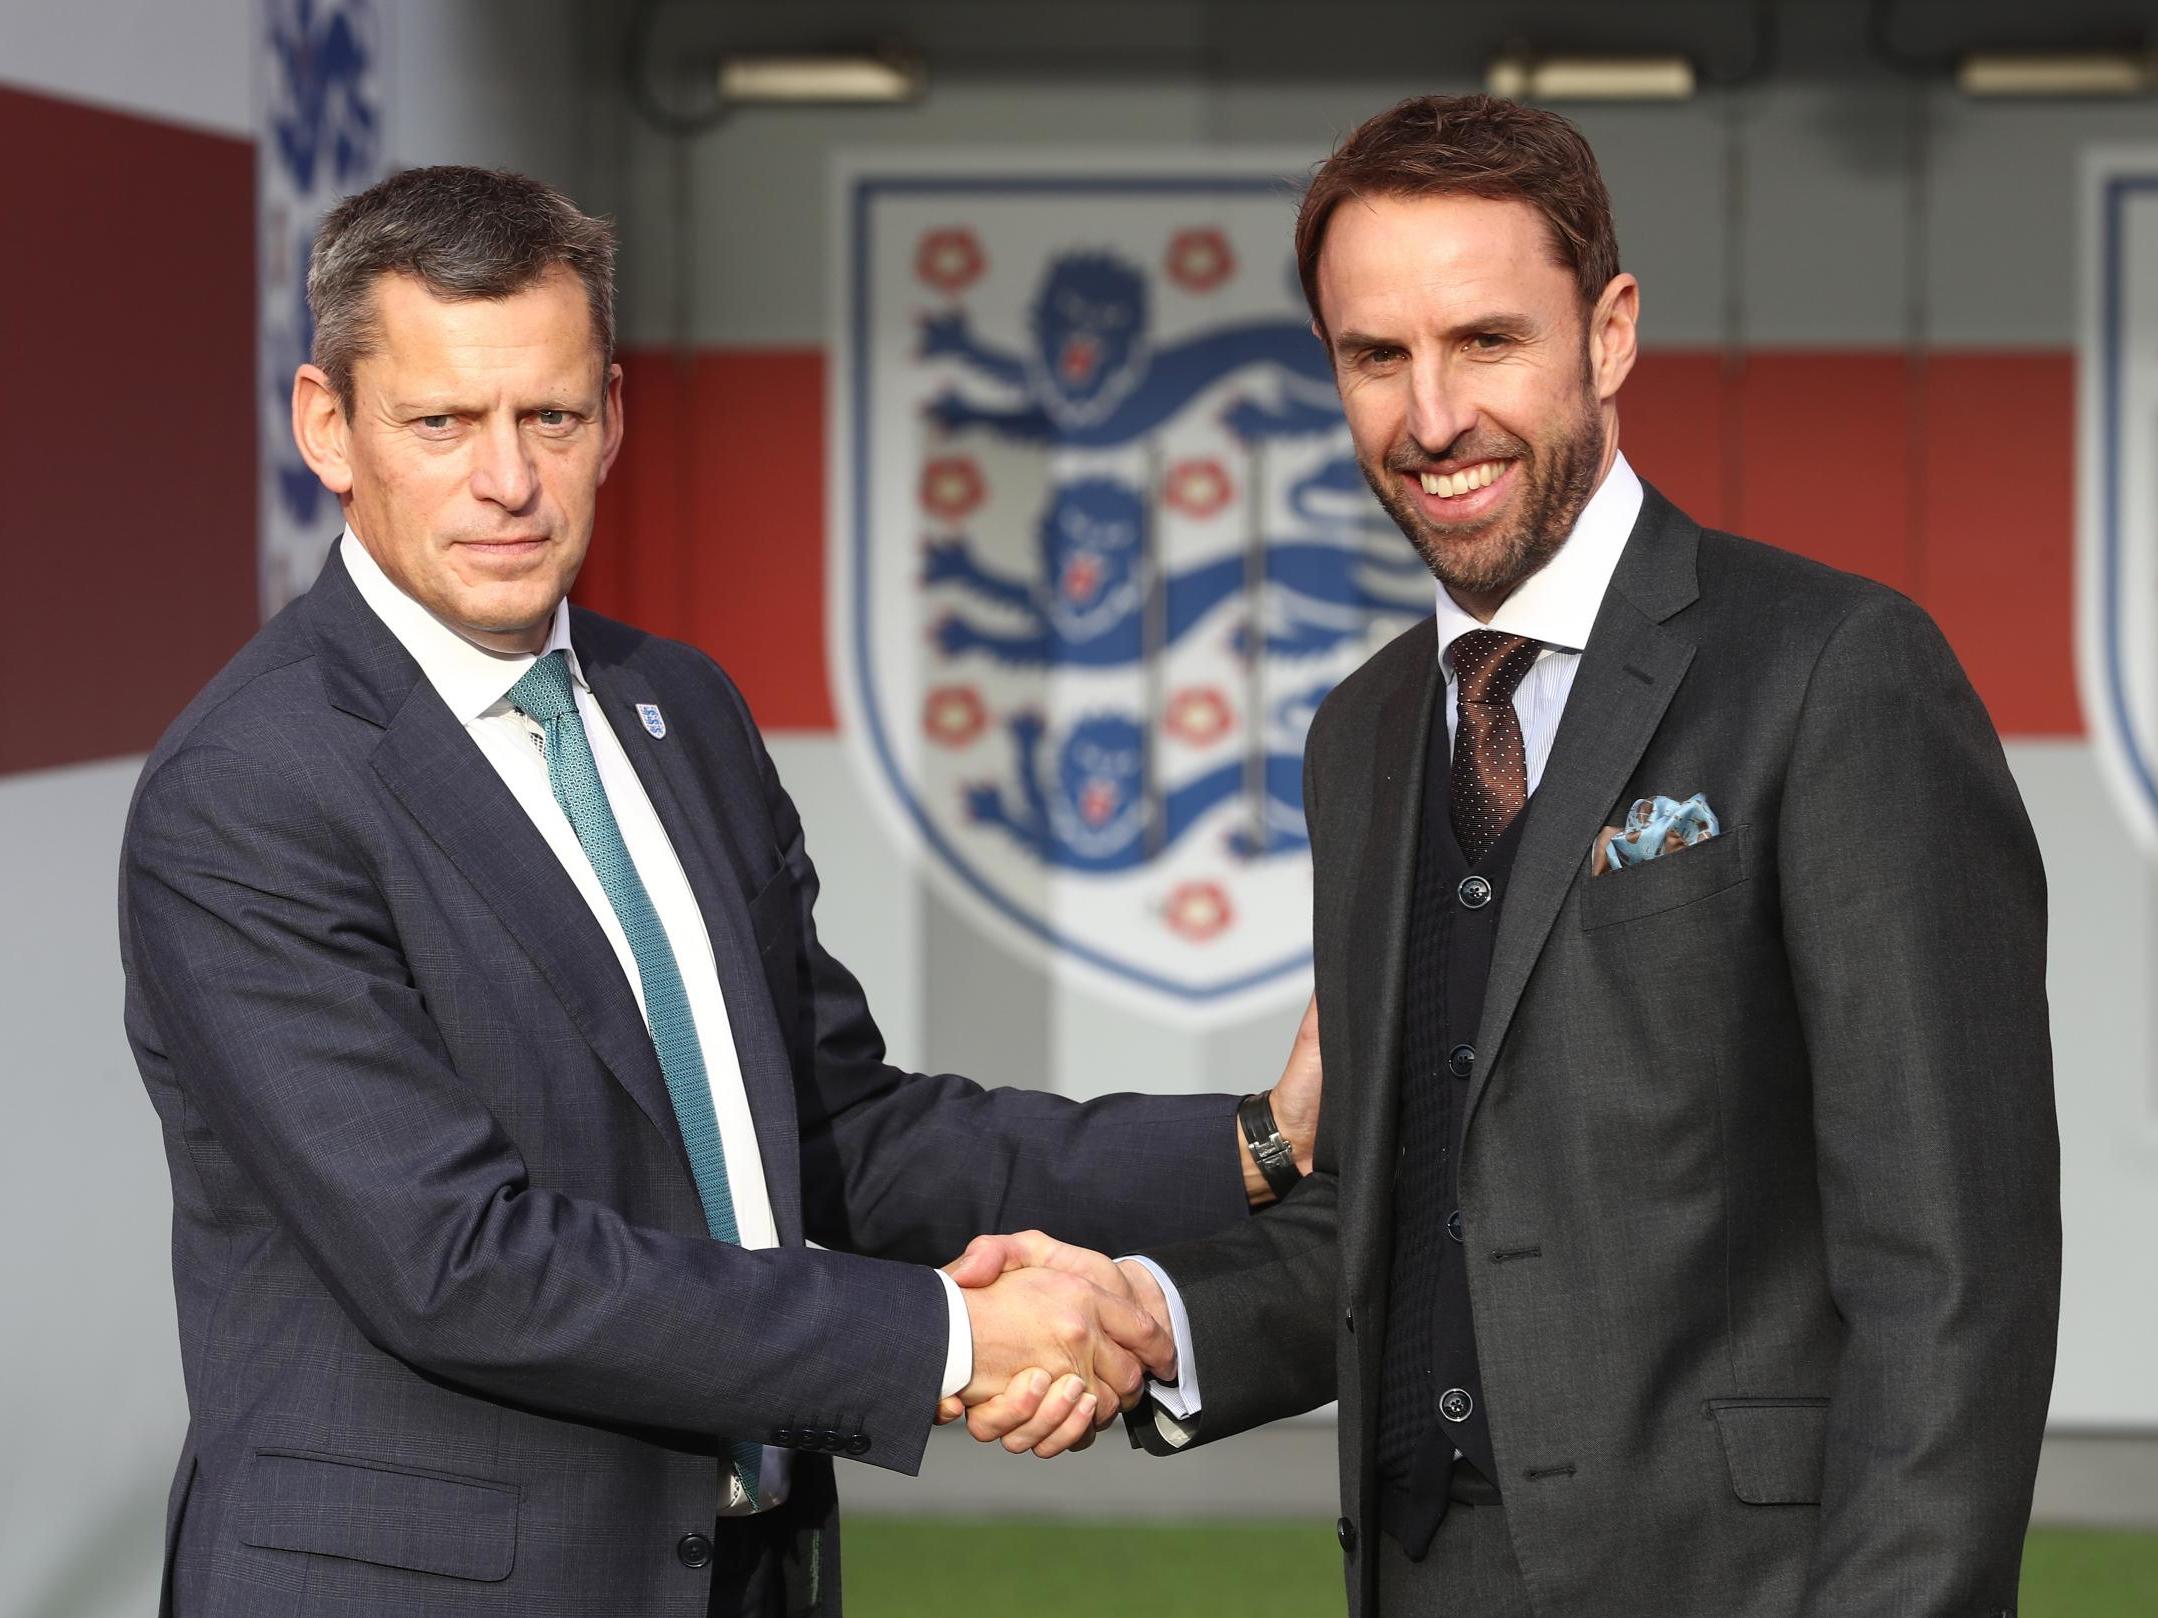 Glenn was also responsible for the appointment of Southgate as England manager